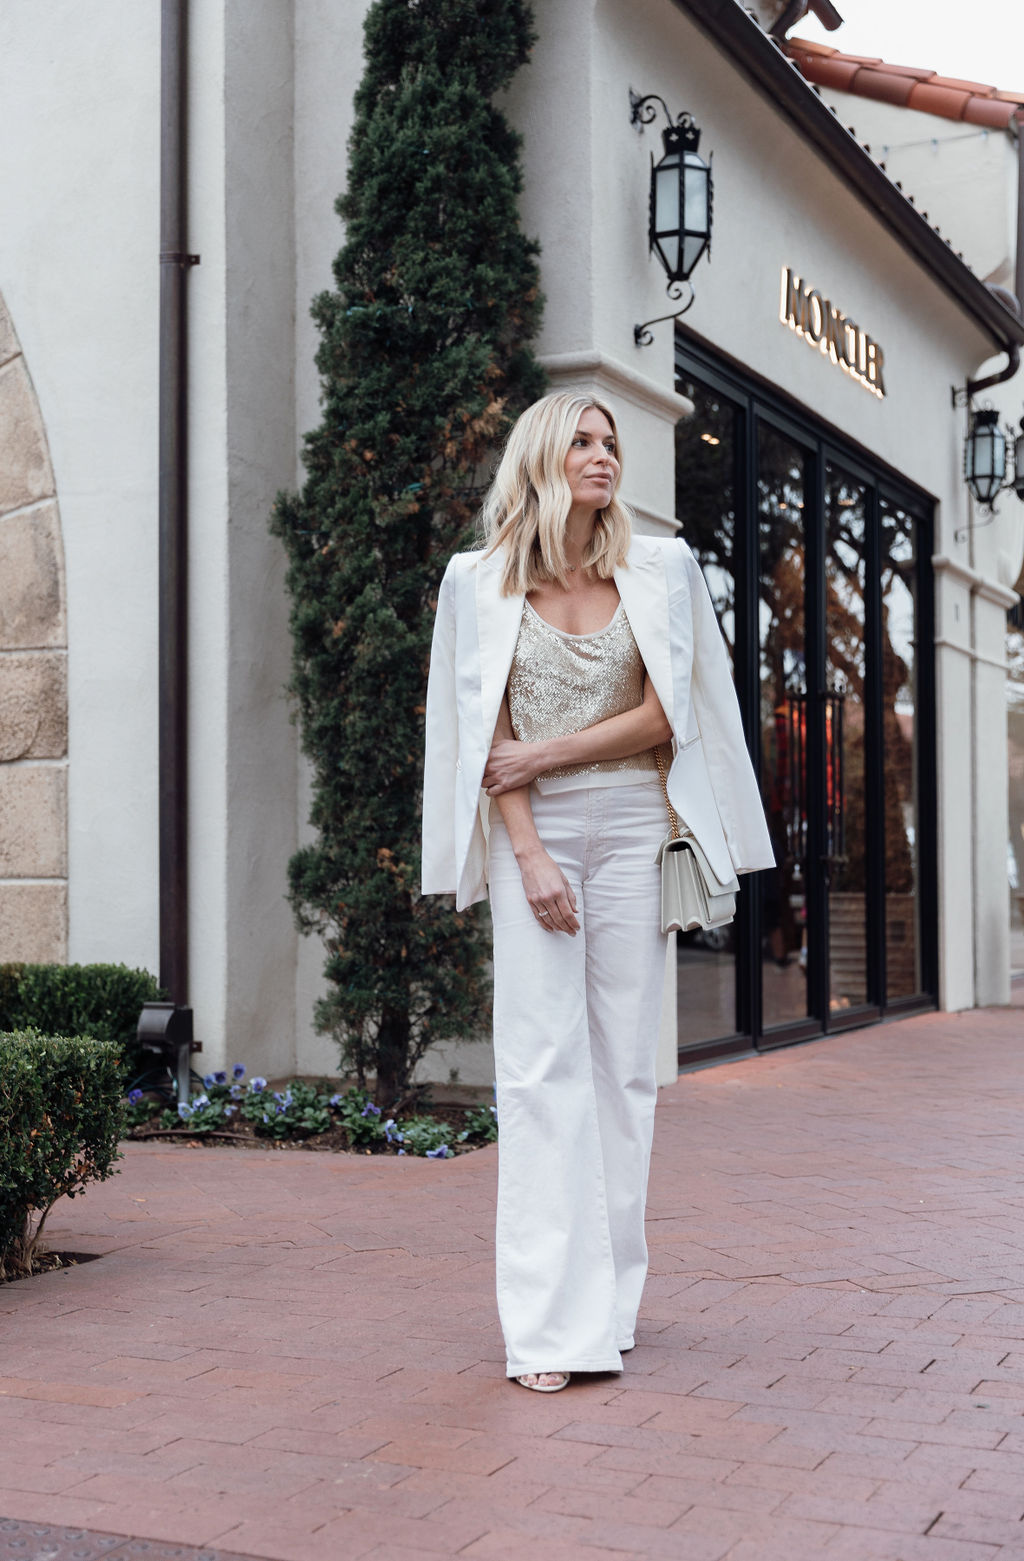 WINTER WHITE OUTFITS – One Small Blonde